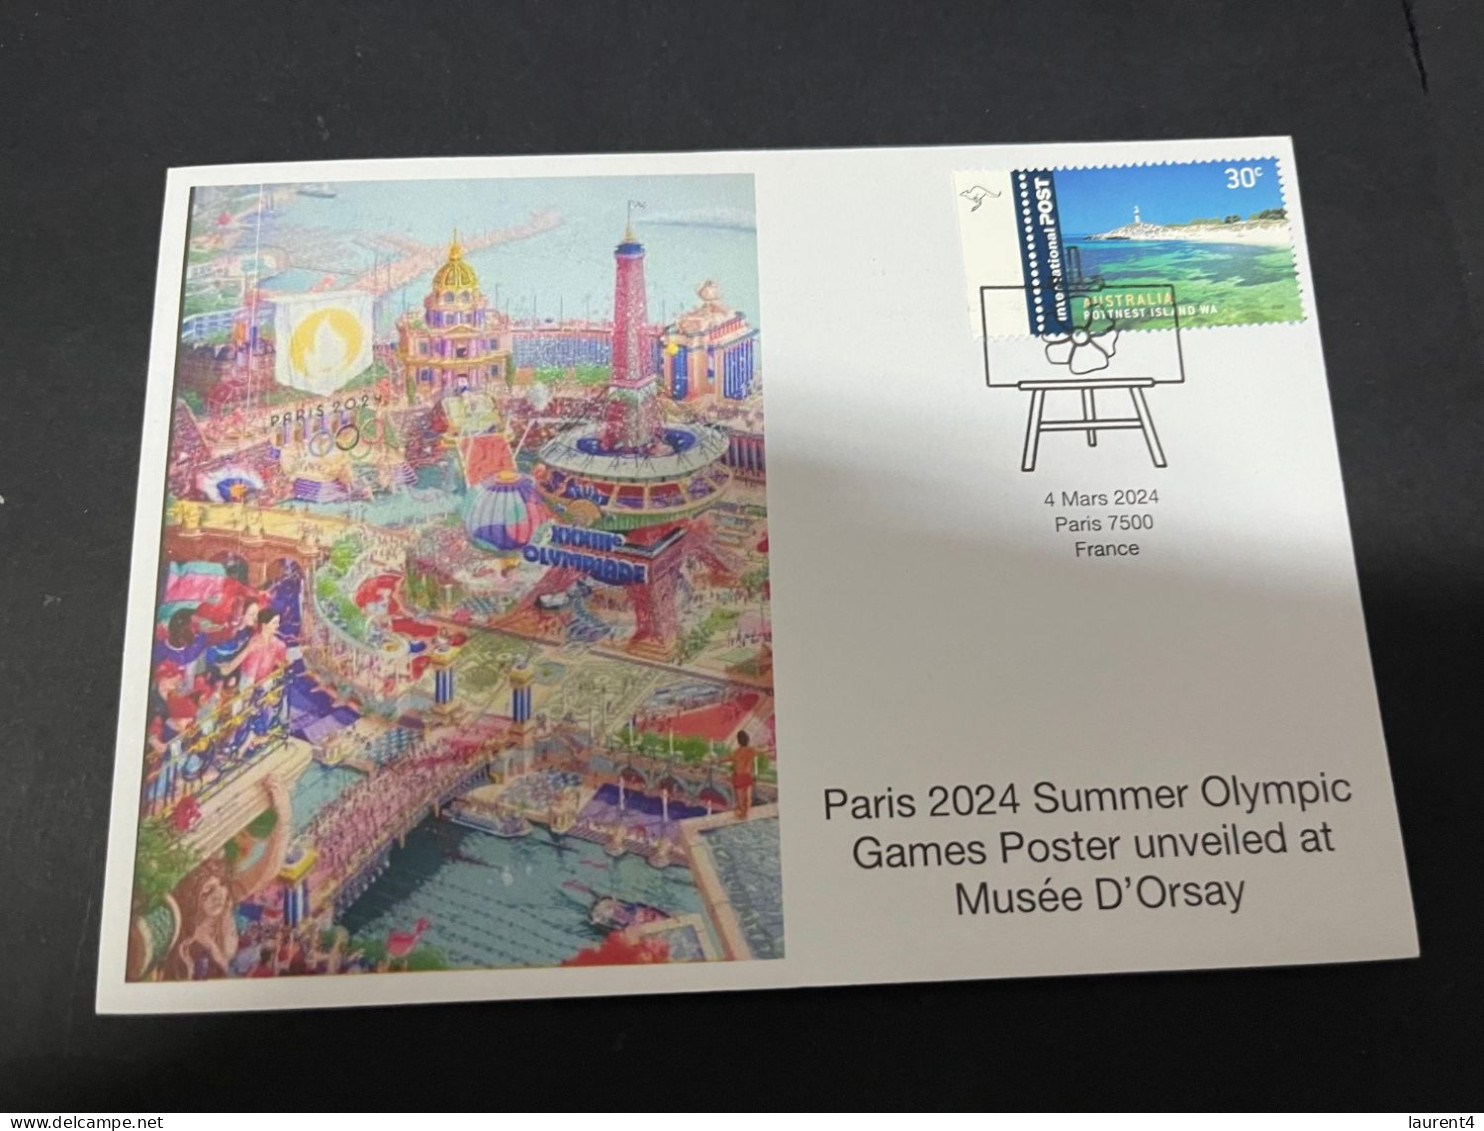 6-3-2024 (2 Y 17) Paris Olympic Games 2024 - 2 Olympic Games Posters Unveil At Musée D'Orsay (2 Covers) - Zomer 2024: Parijs